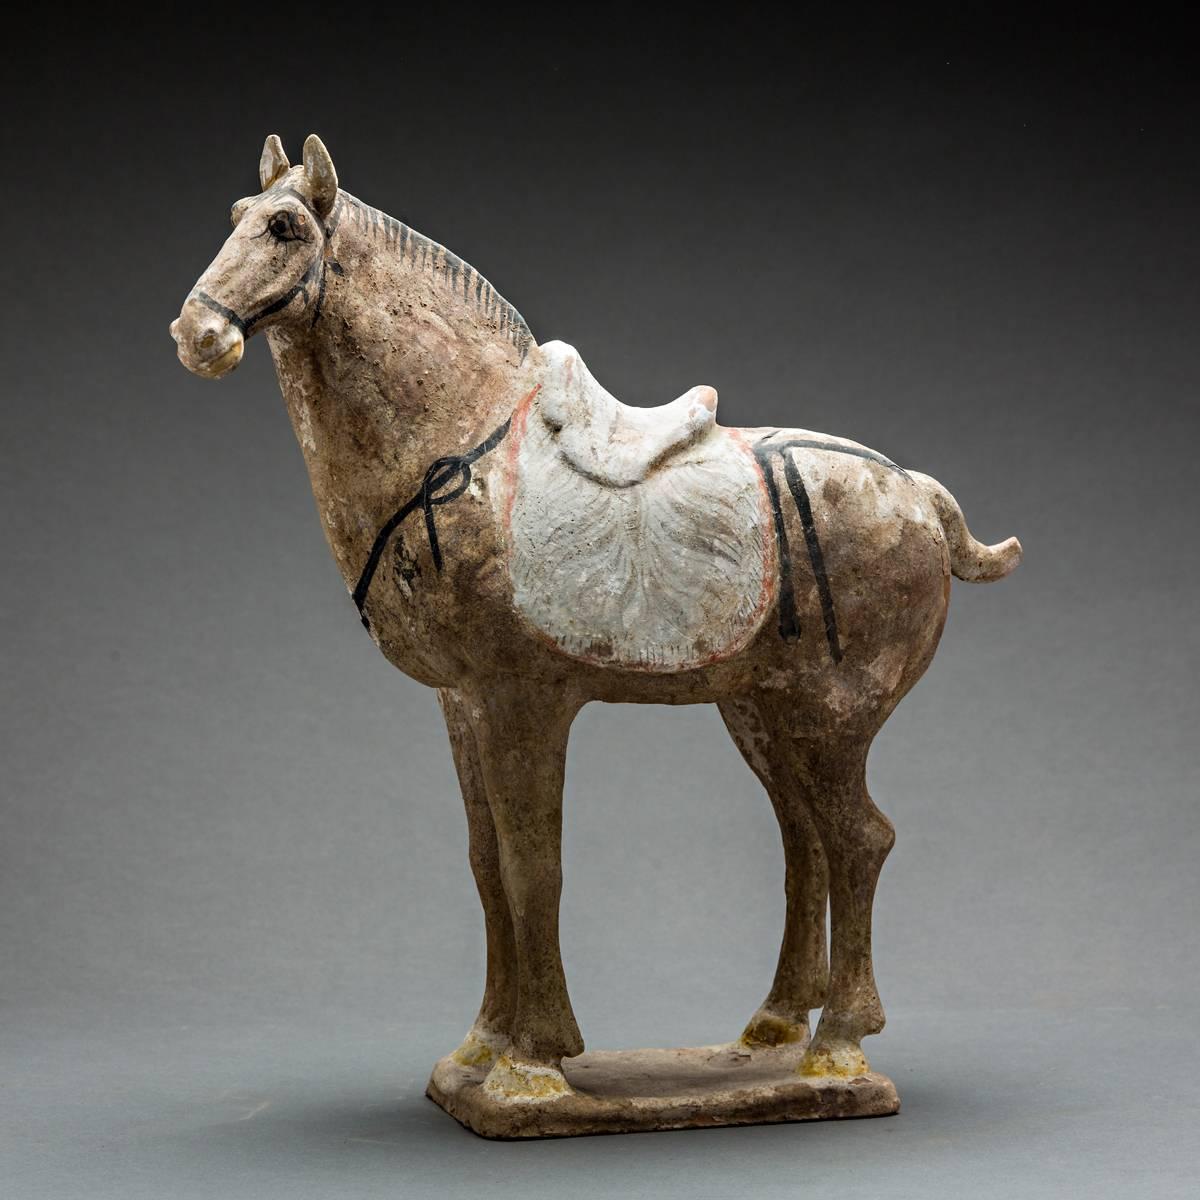 During the Tang dynasty, China enjoyed a period of consolidation, achievement, and confidence. T'ang art tends to reflect this assurance in its realism, energy, and dignity. Pottery of this era is often compared to that of Classical Greece for the